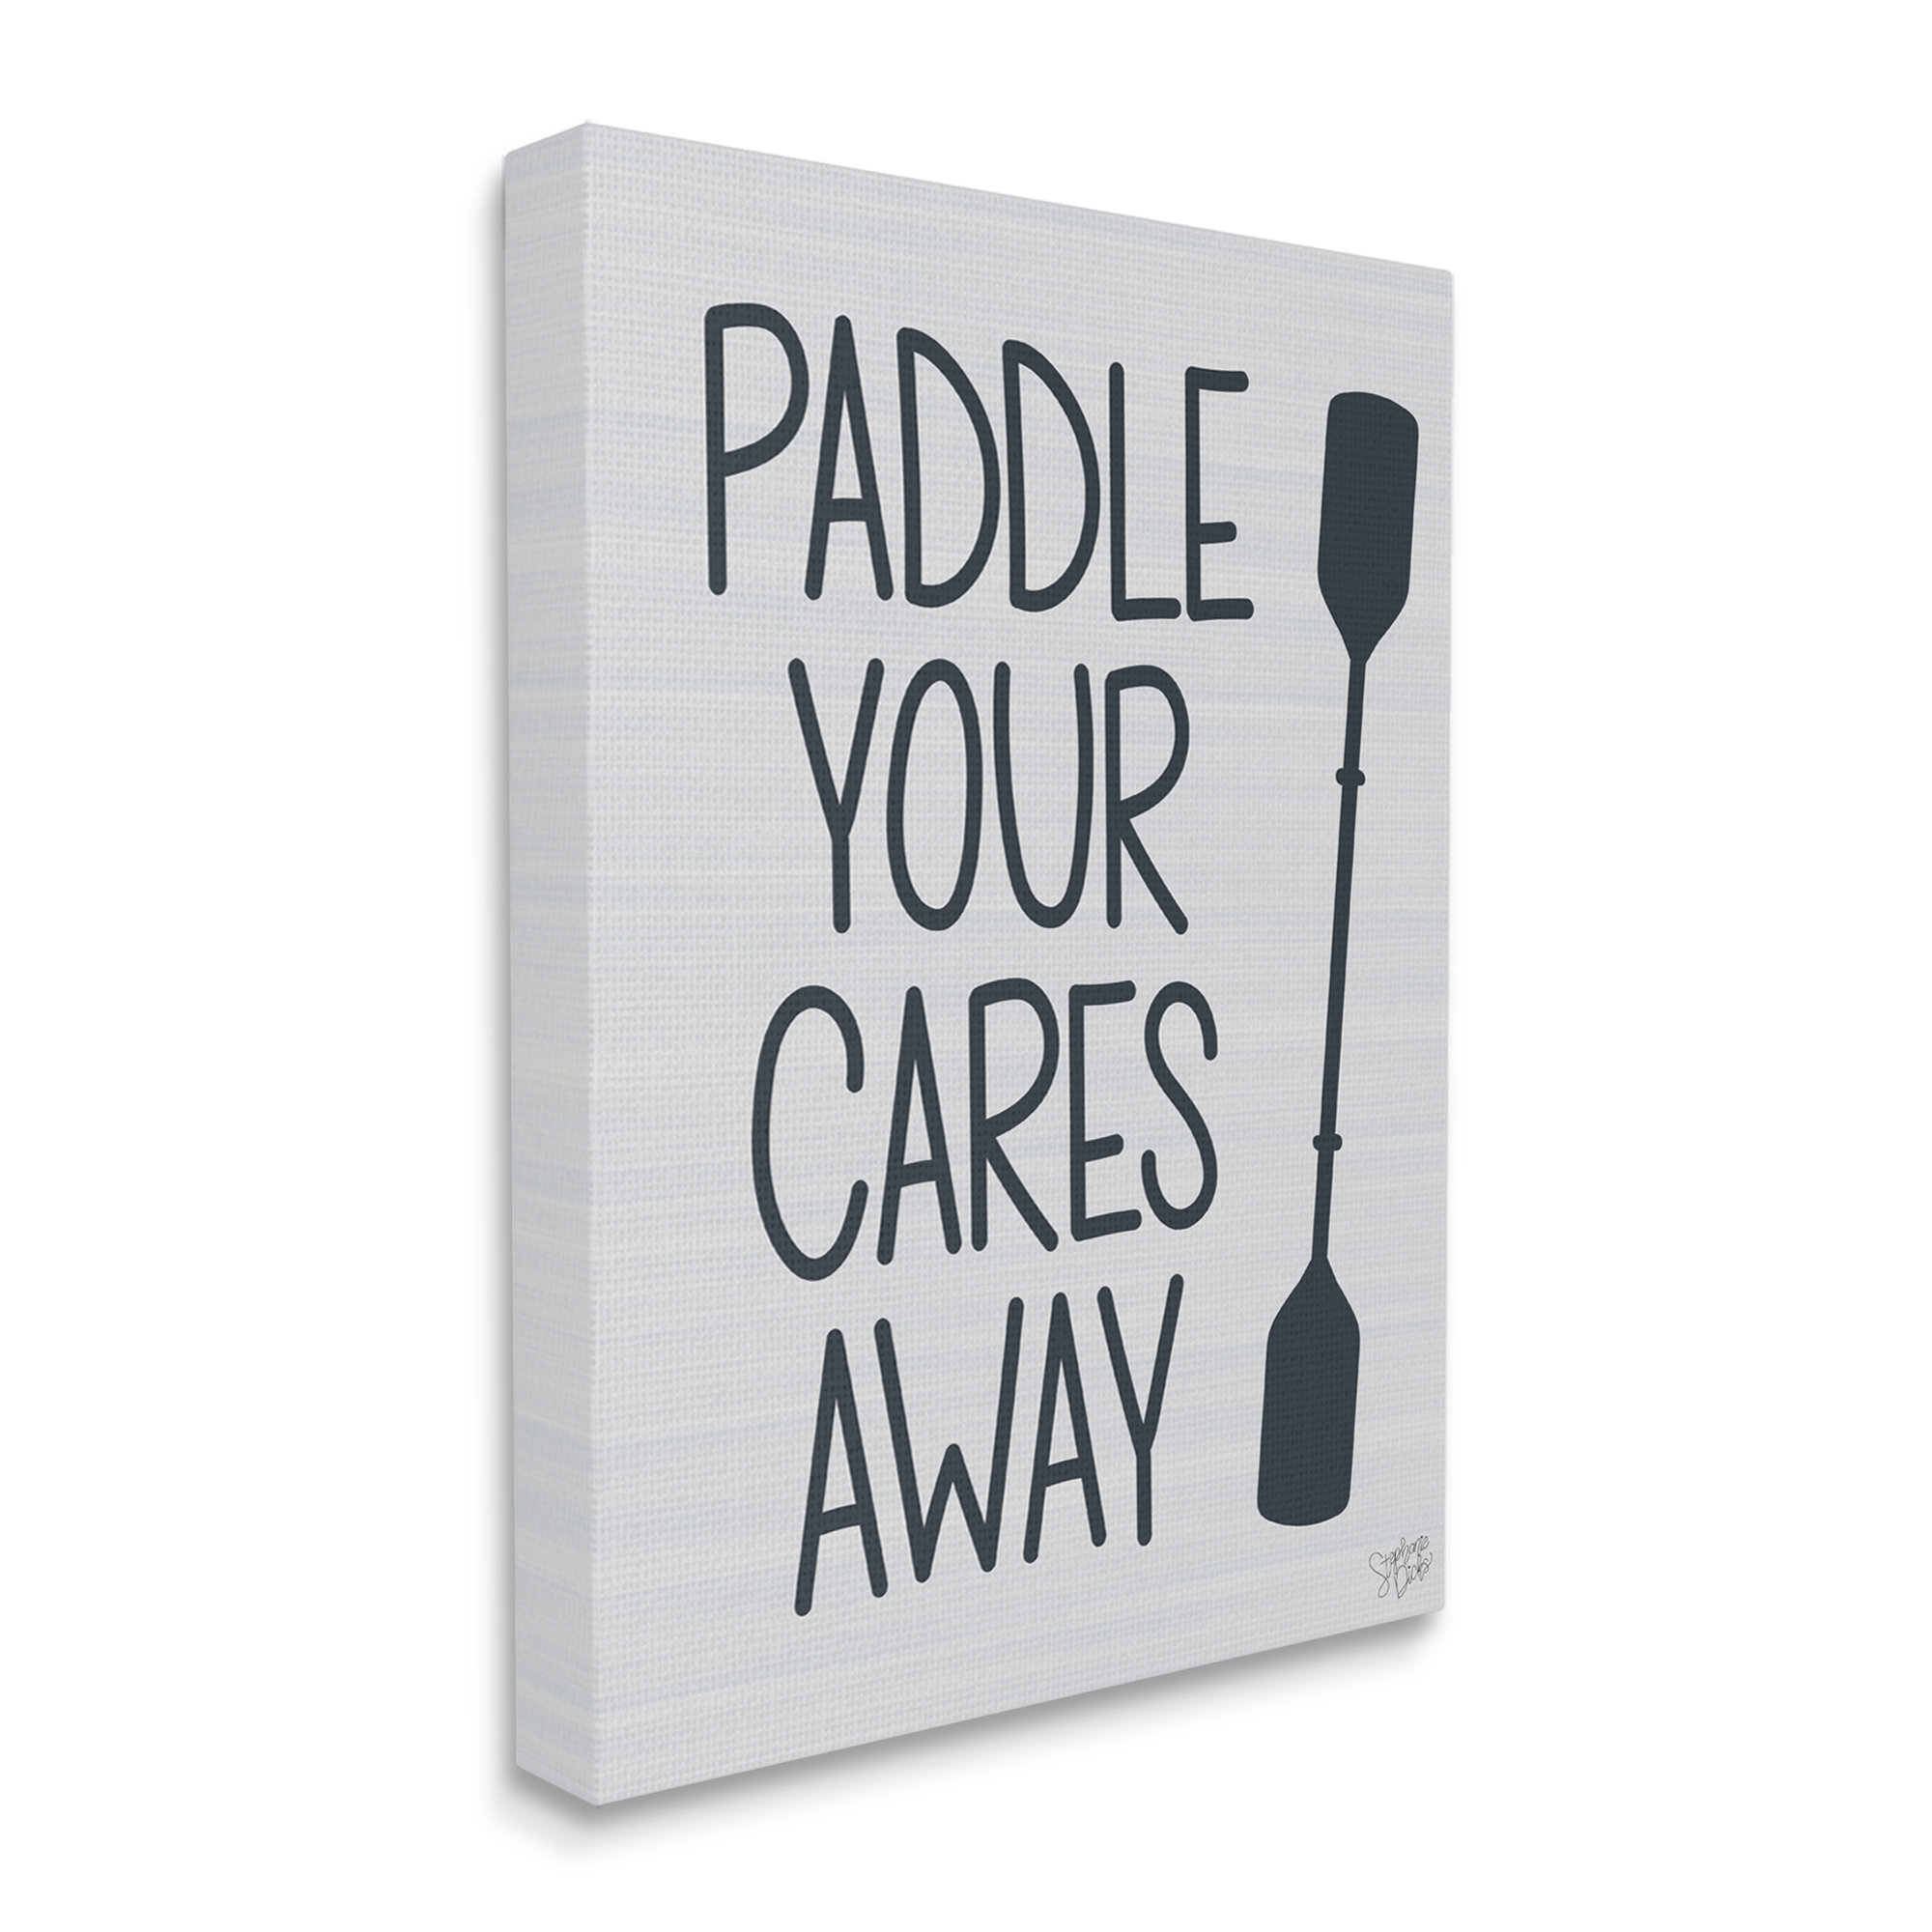 Stupell Paddle Your Cares Away Boating Phrase Landscape Painting Gallery Wrapped Canvas Print Wall Art, Size: 36 x 48